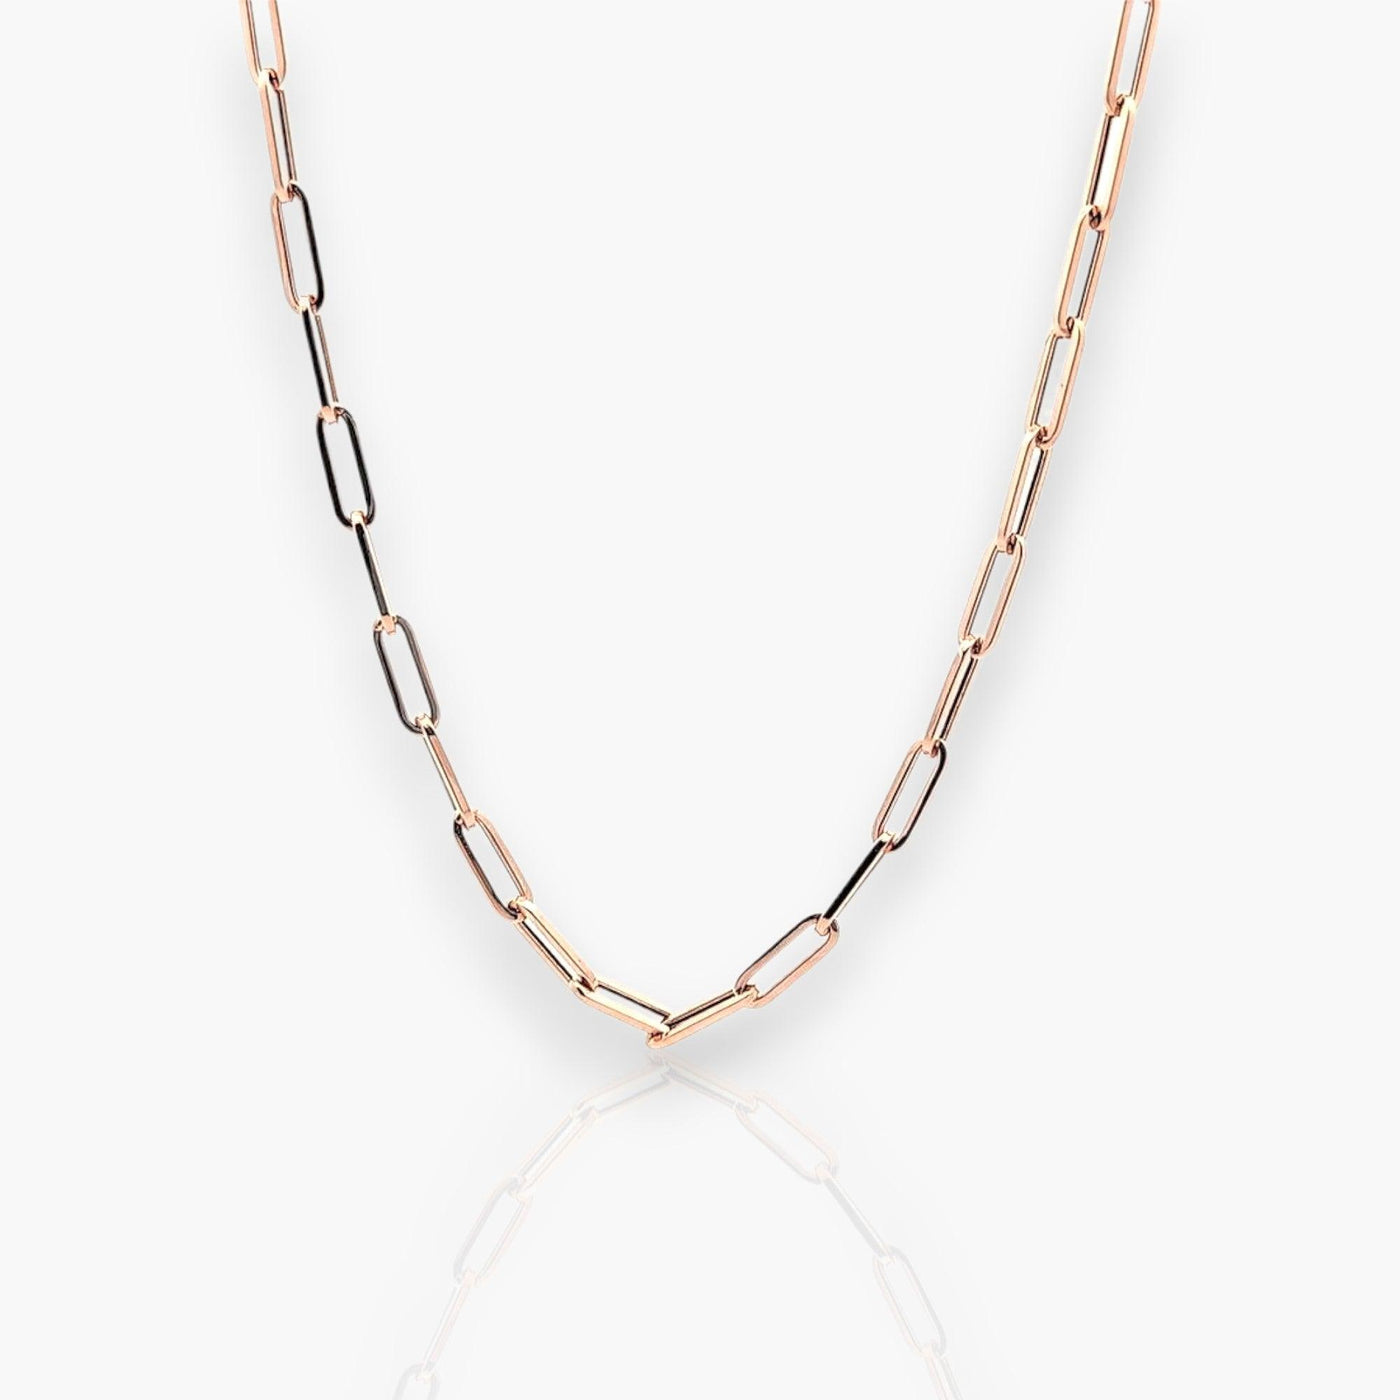 18K Rose Gold Chain Necklace - Moregola Fine Jewelry